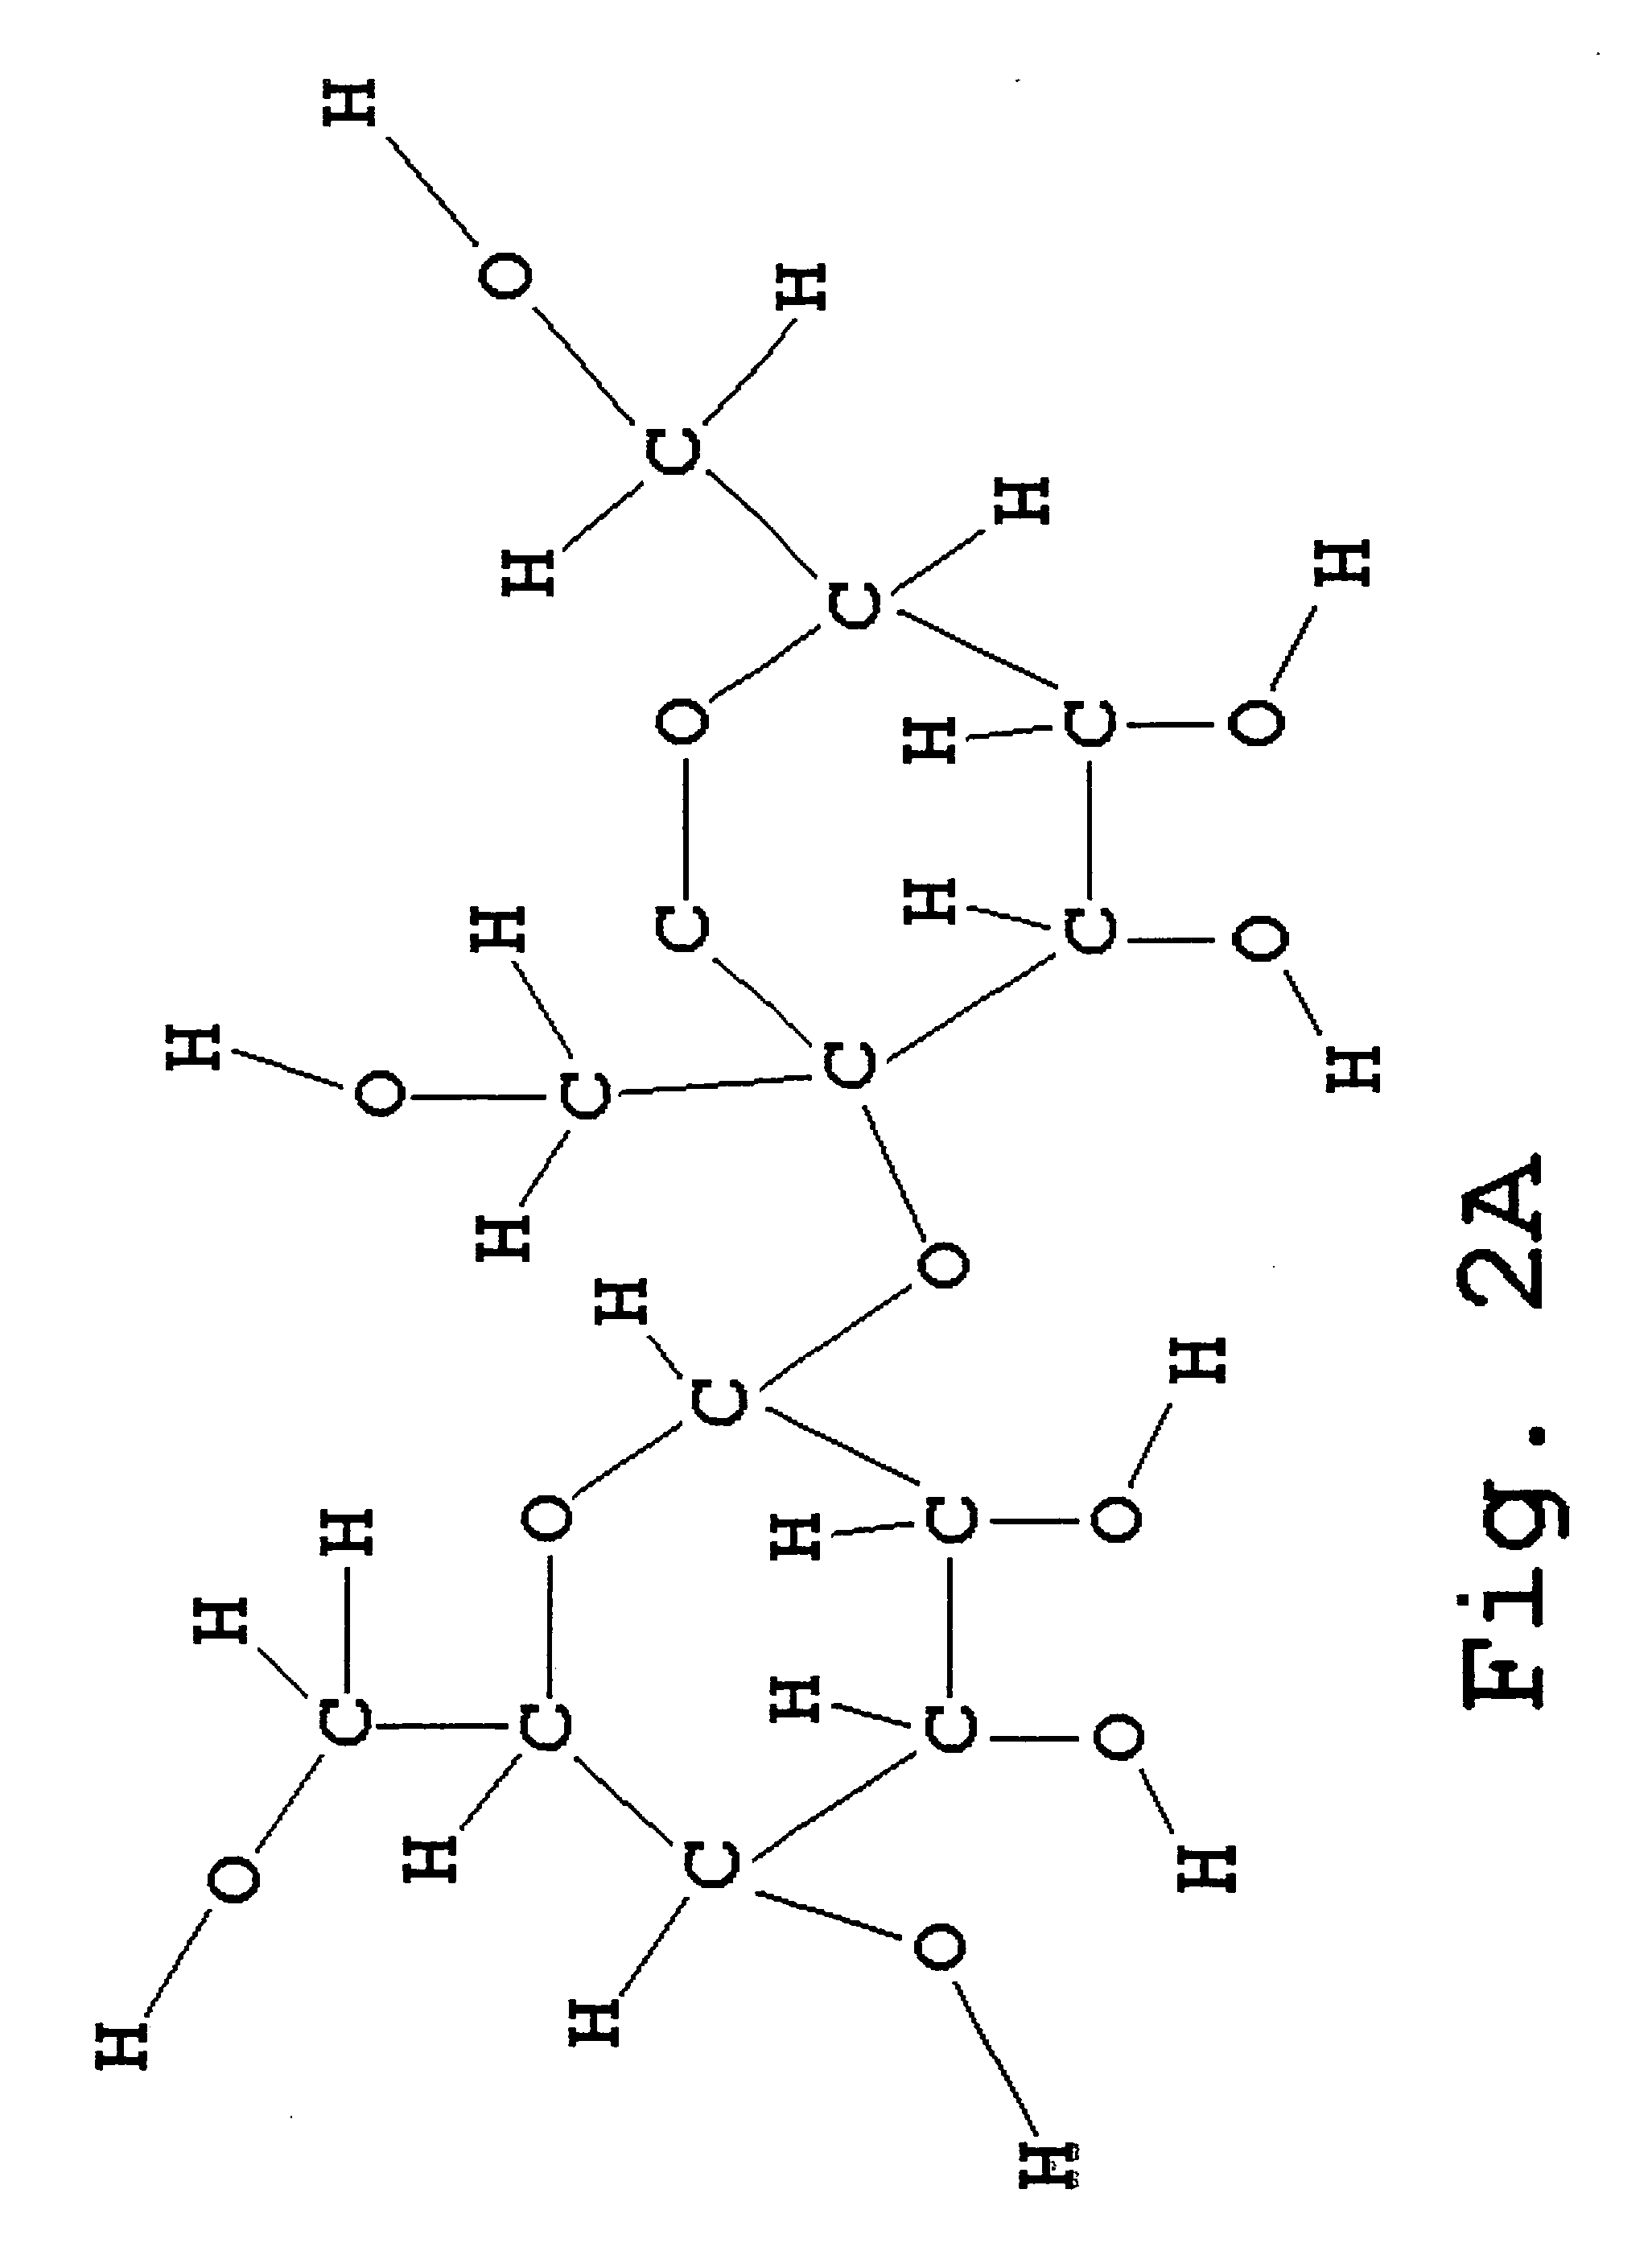 Method of manufacturing particulate ice cream for storage in conventional freezers